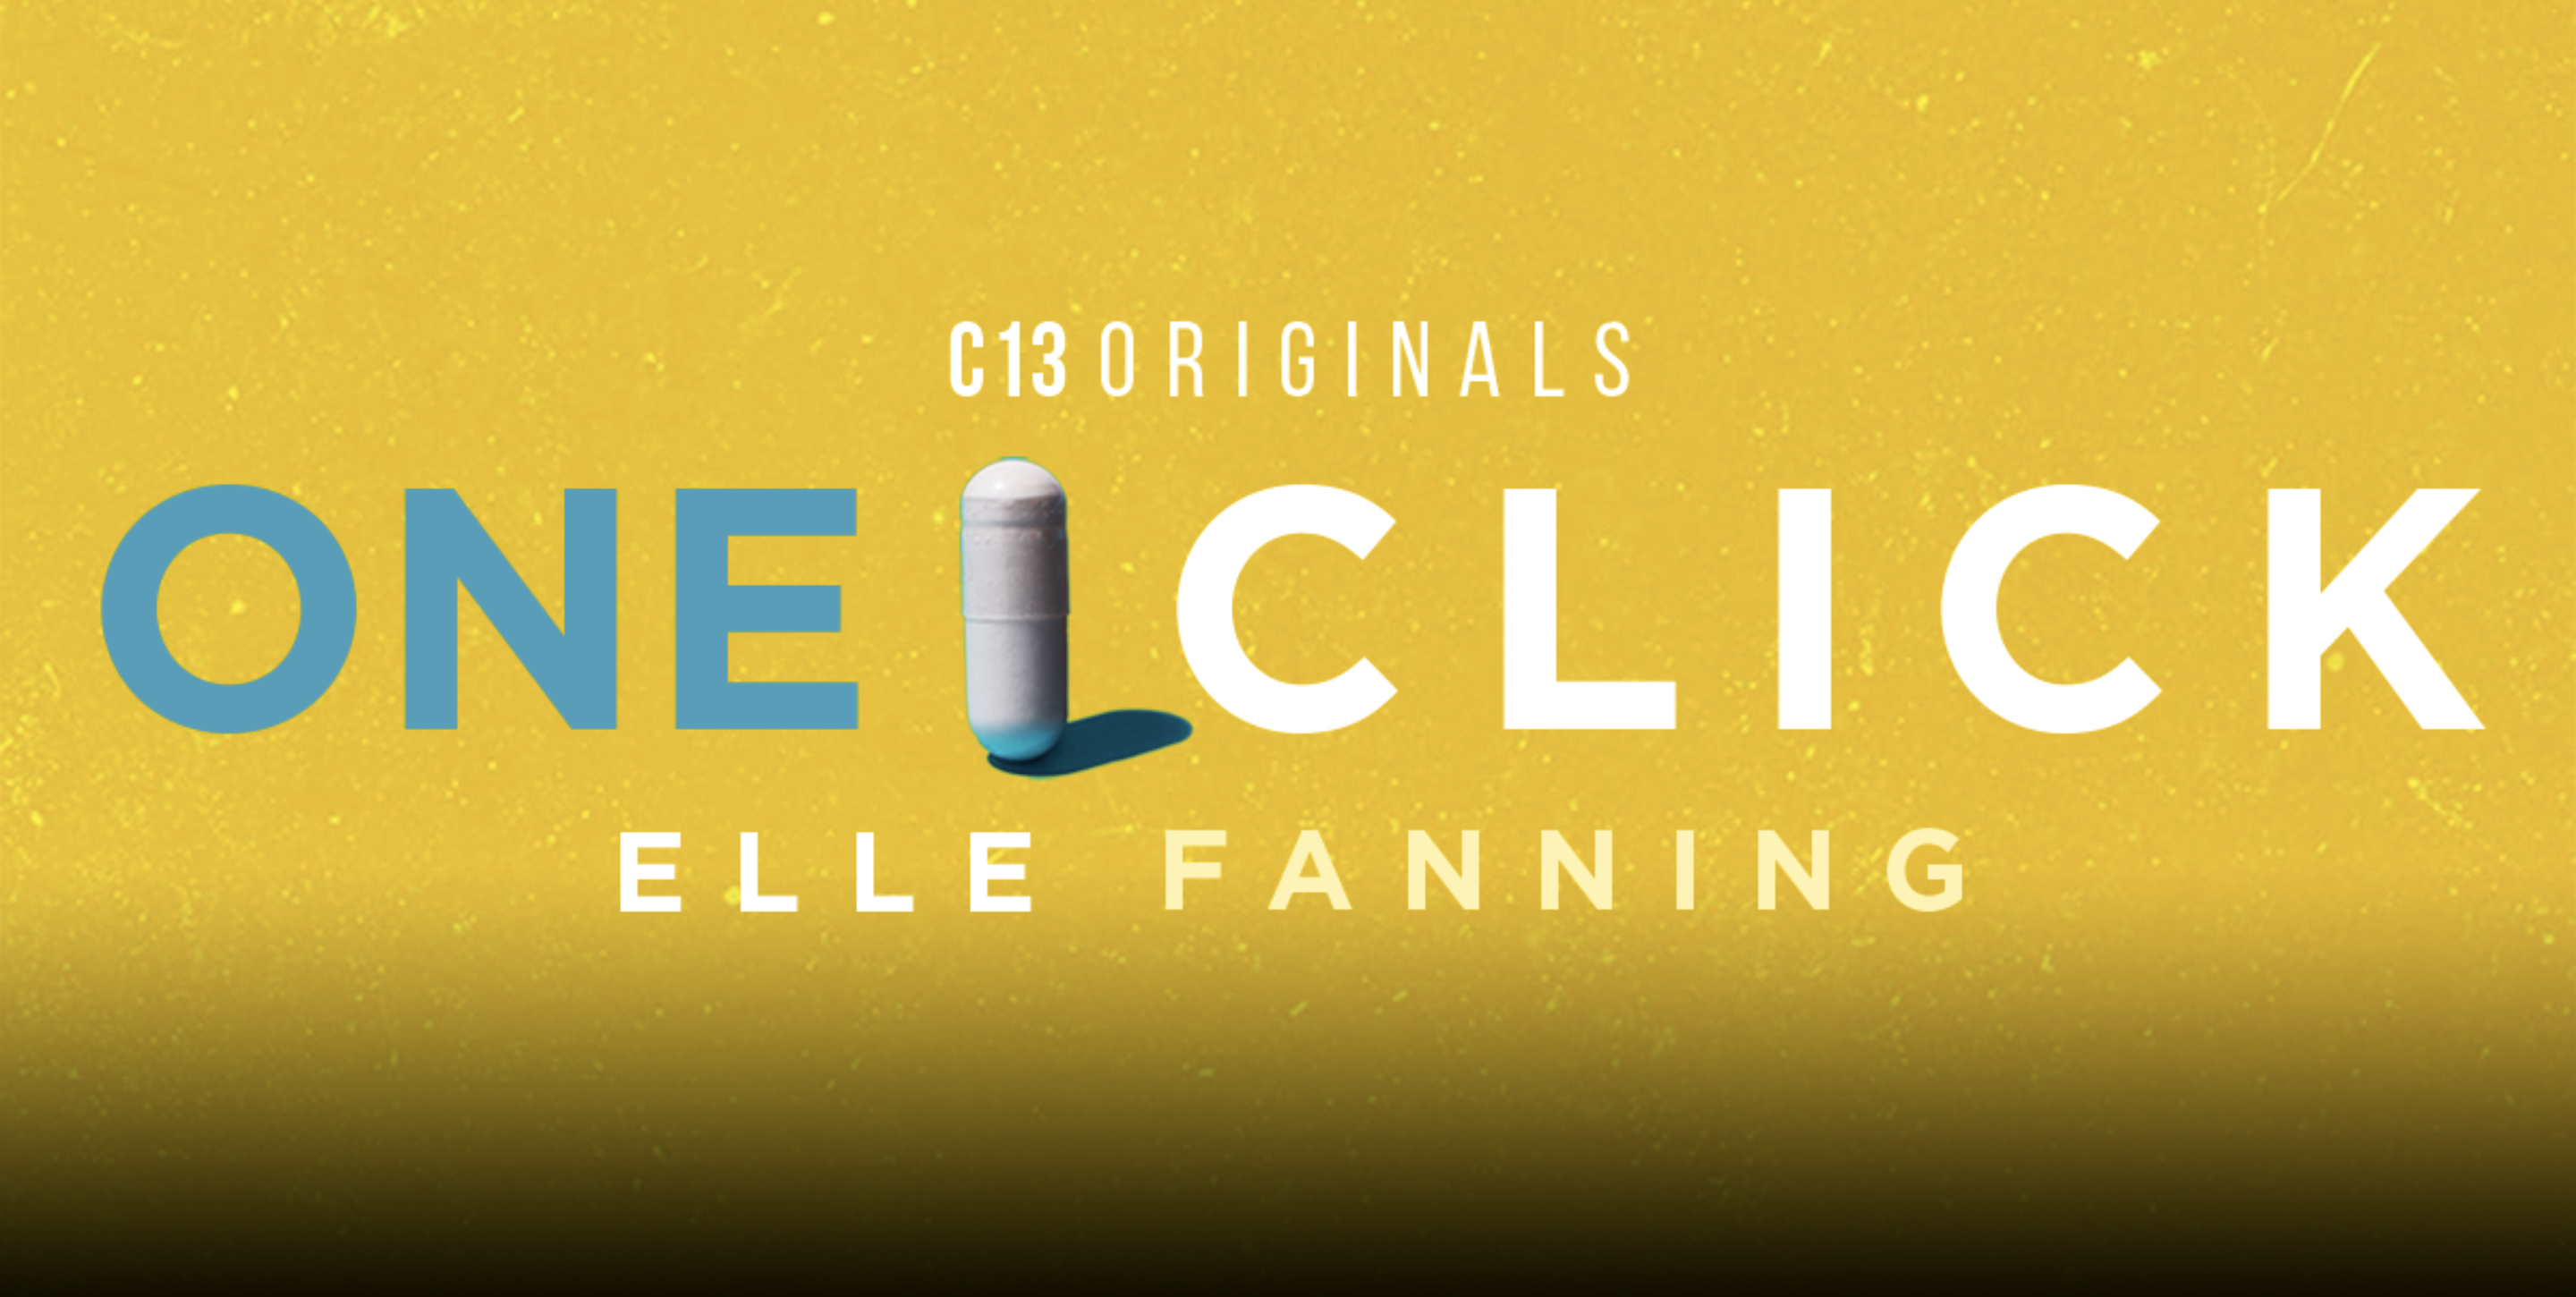 One Click splash logo. Text reads 'C13Originals One Click Elle Fanning'. Image depicts a pill over a bright yellow background.